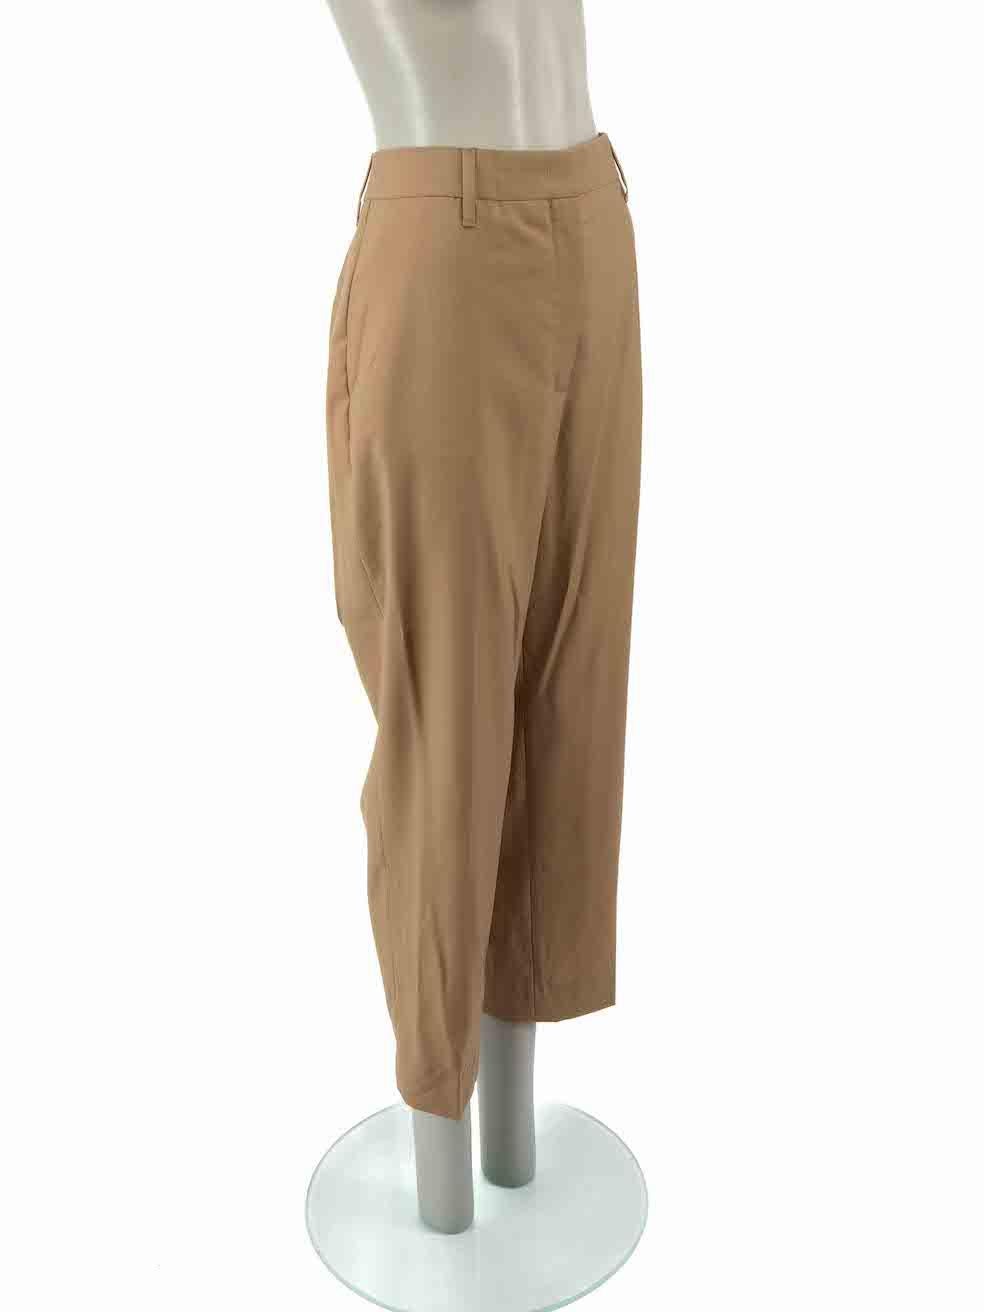 CONDITION is Very good. Hardly any visible wear to trousers is evident on this used Prada designer resale item.
 
Details
Brown
Wool
Straight leg trousers
High rise
Front zip closure with hook and button
Belt hoops
2x Front side pockets
2x Back